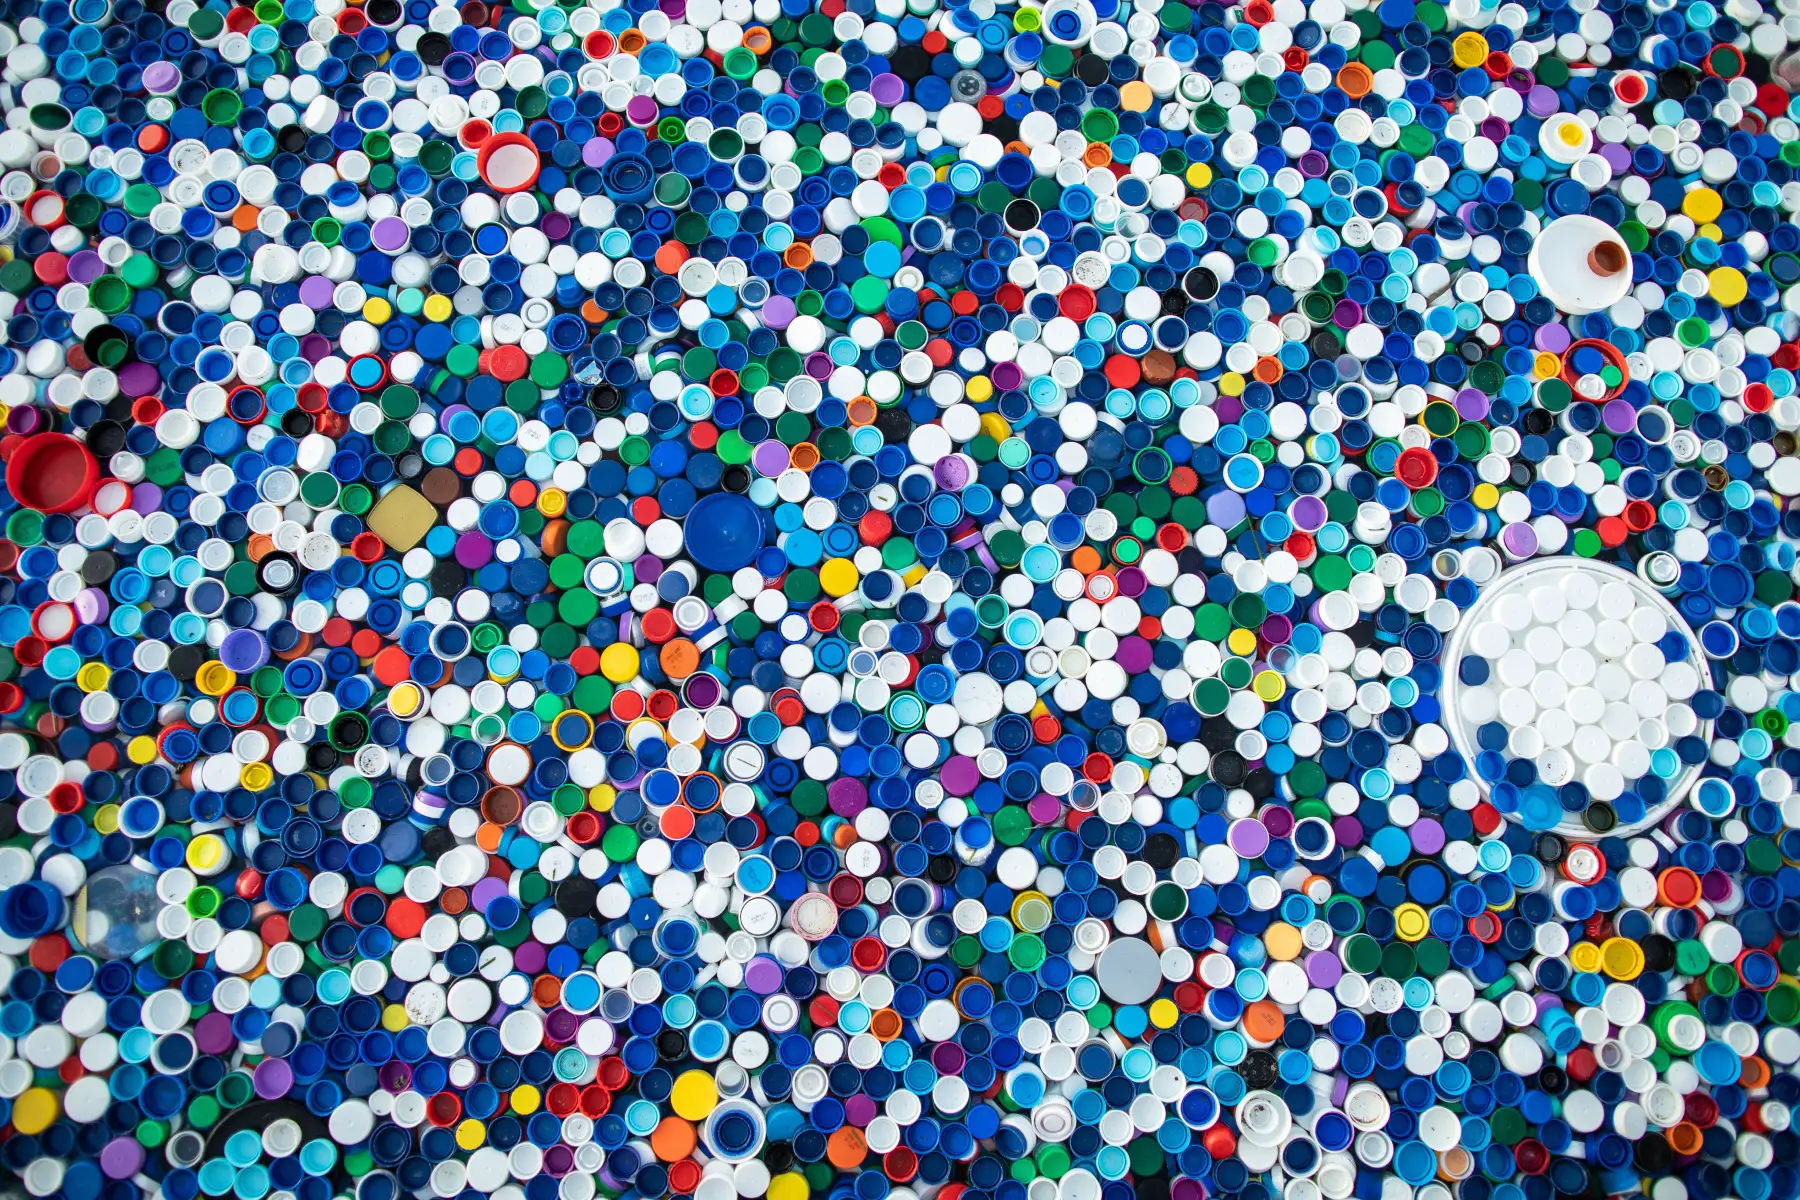 Colorful bottle lids ready for recycling